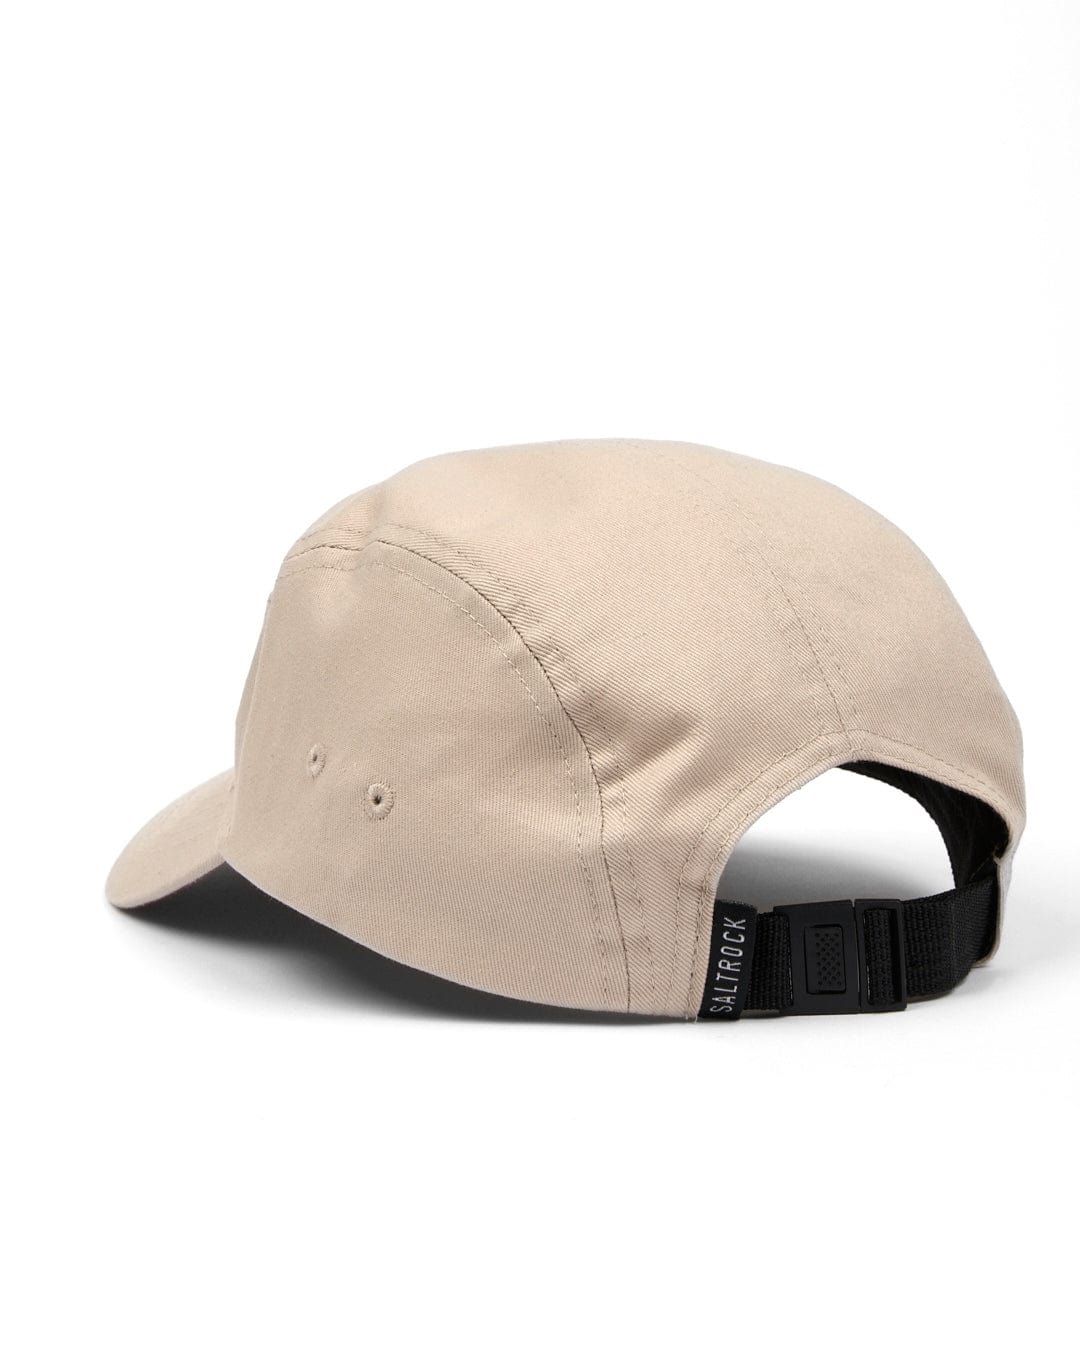 Beige cotton baseball cap with adjustable strap Boardwalk - 5 Panel Cap - Cream on a white background by Saltrock.